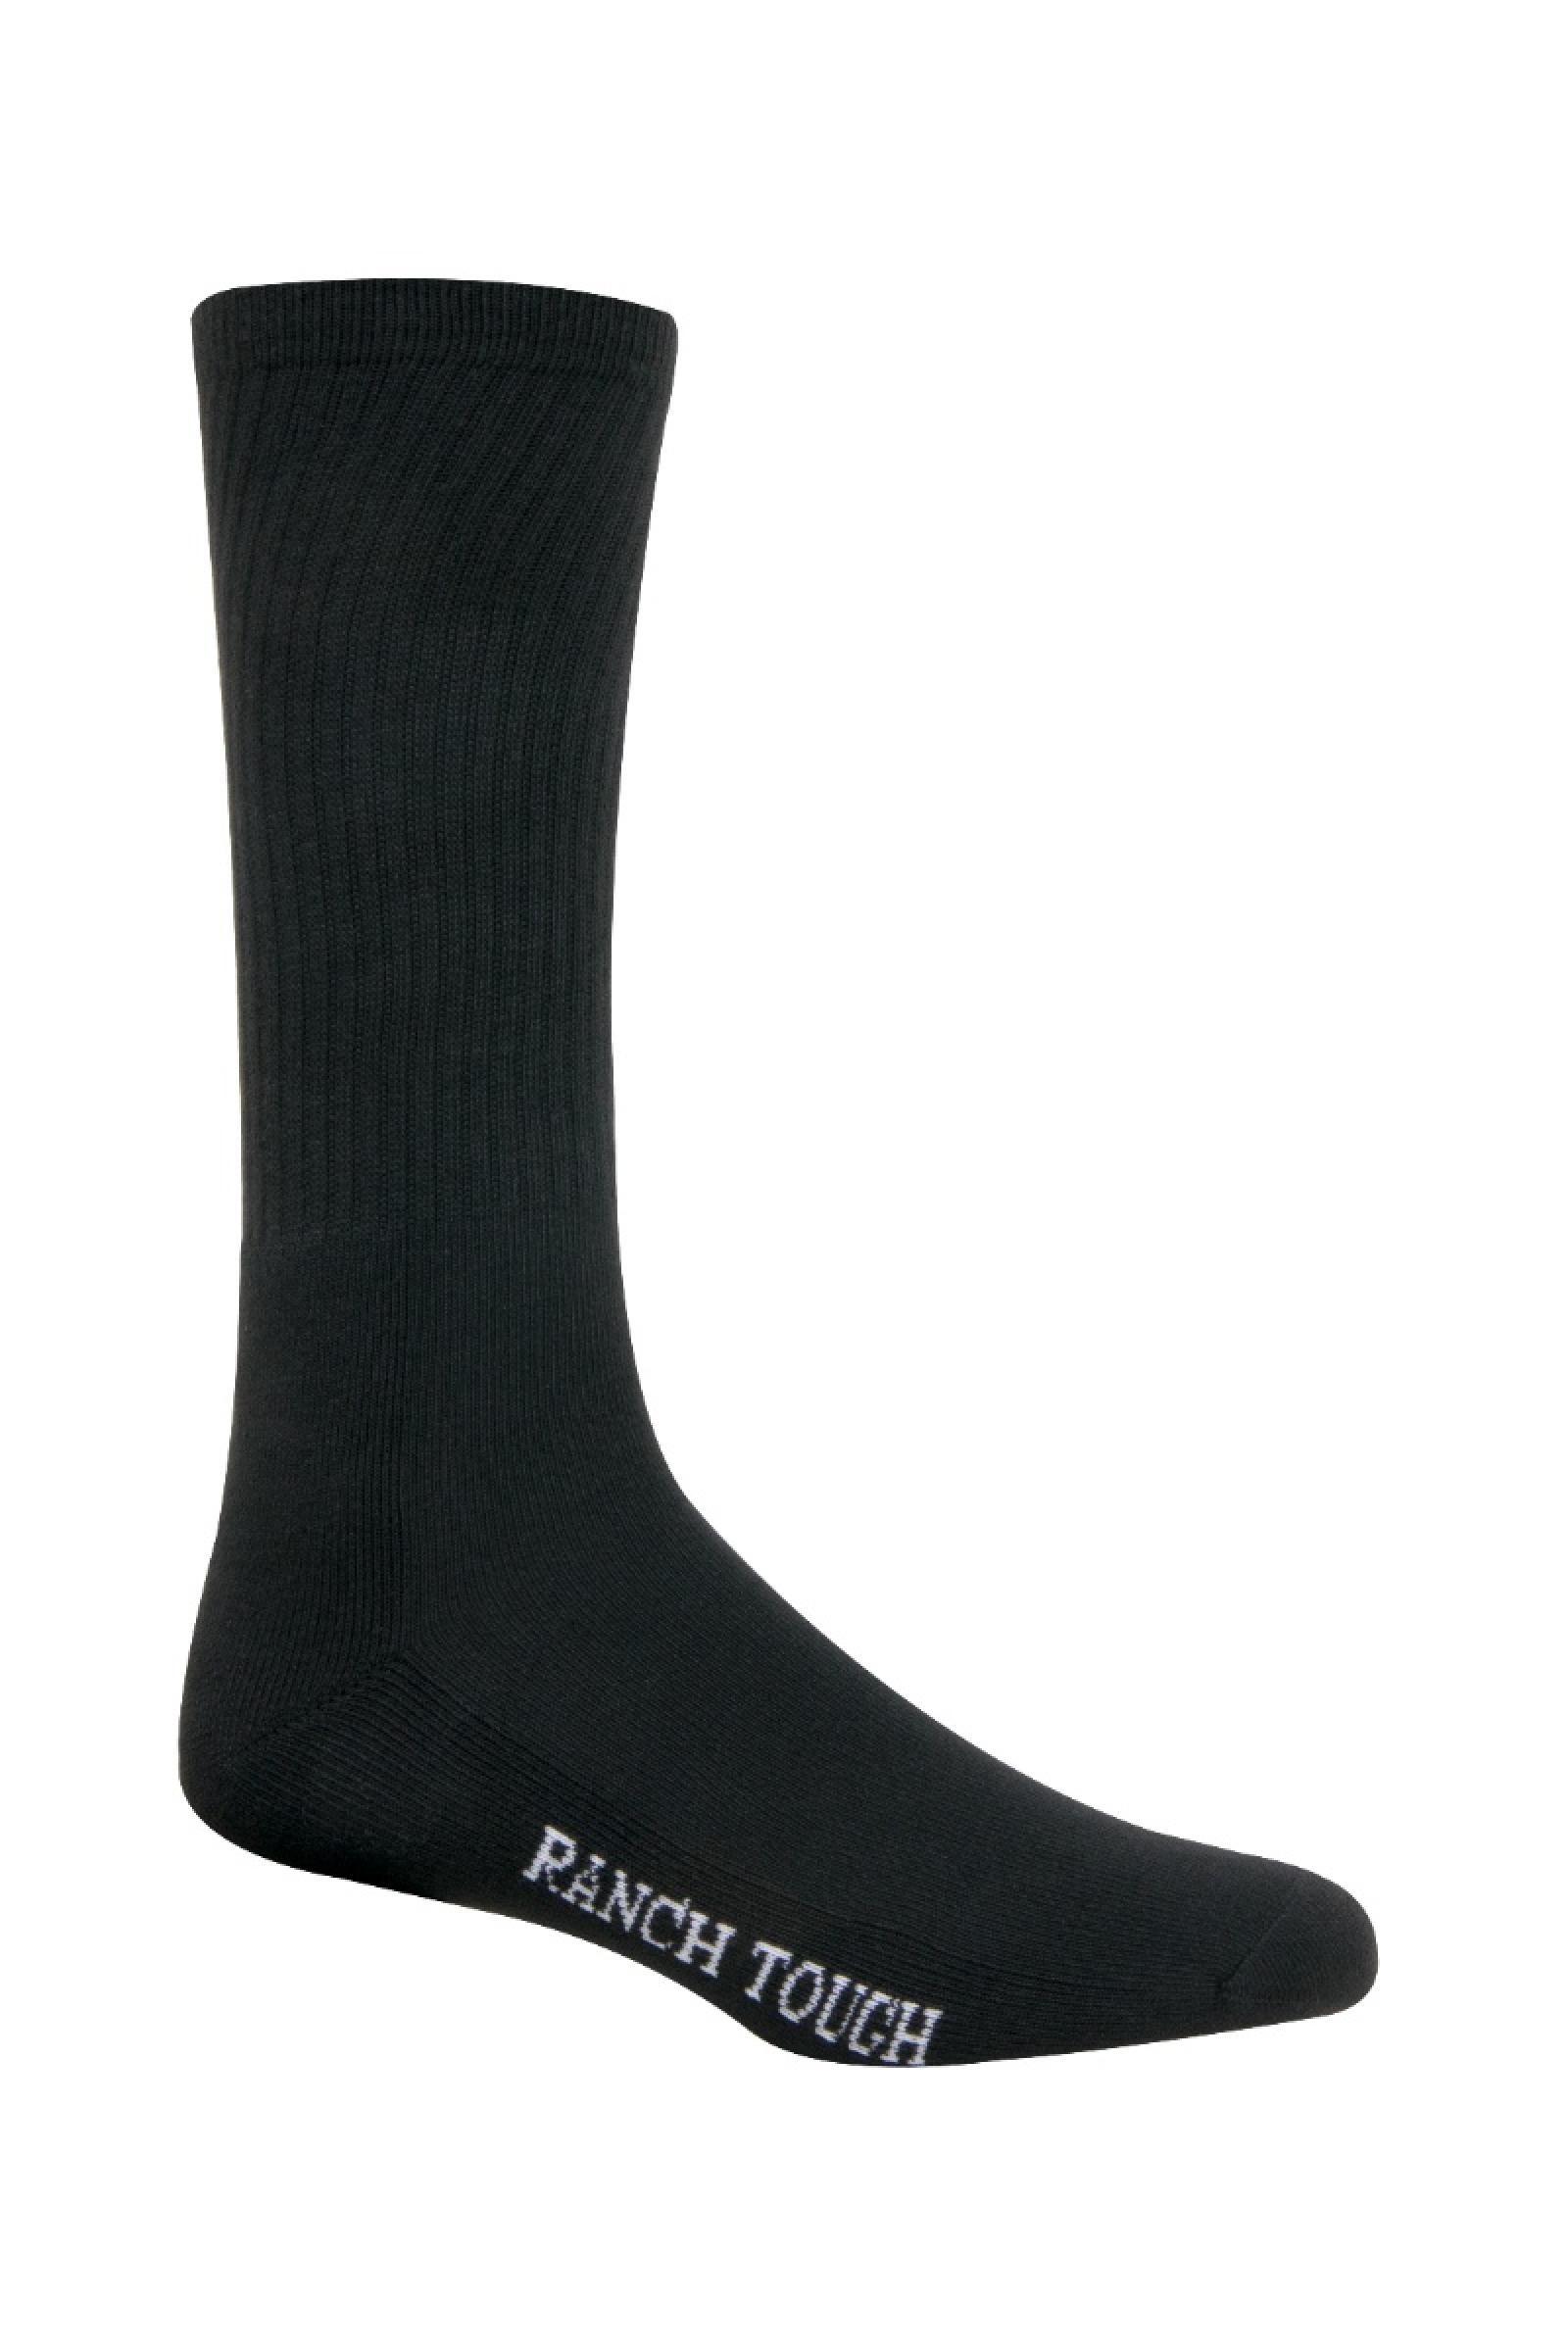 Noble Outfitters Ranch Tough® Crew Socks - 6 Pack